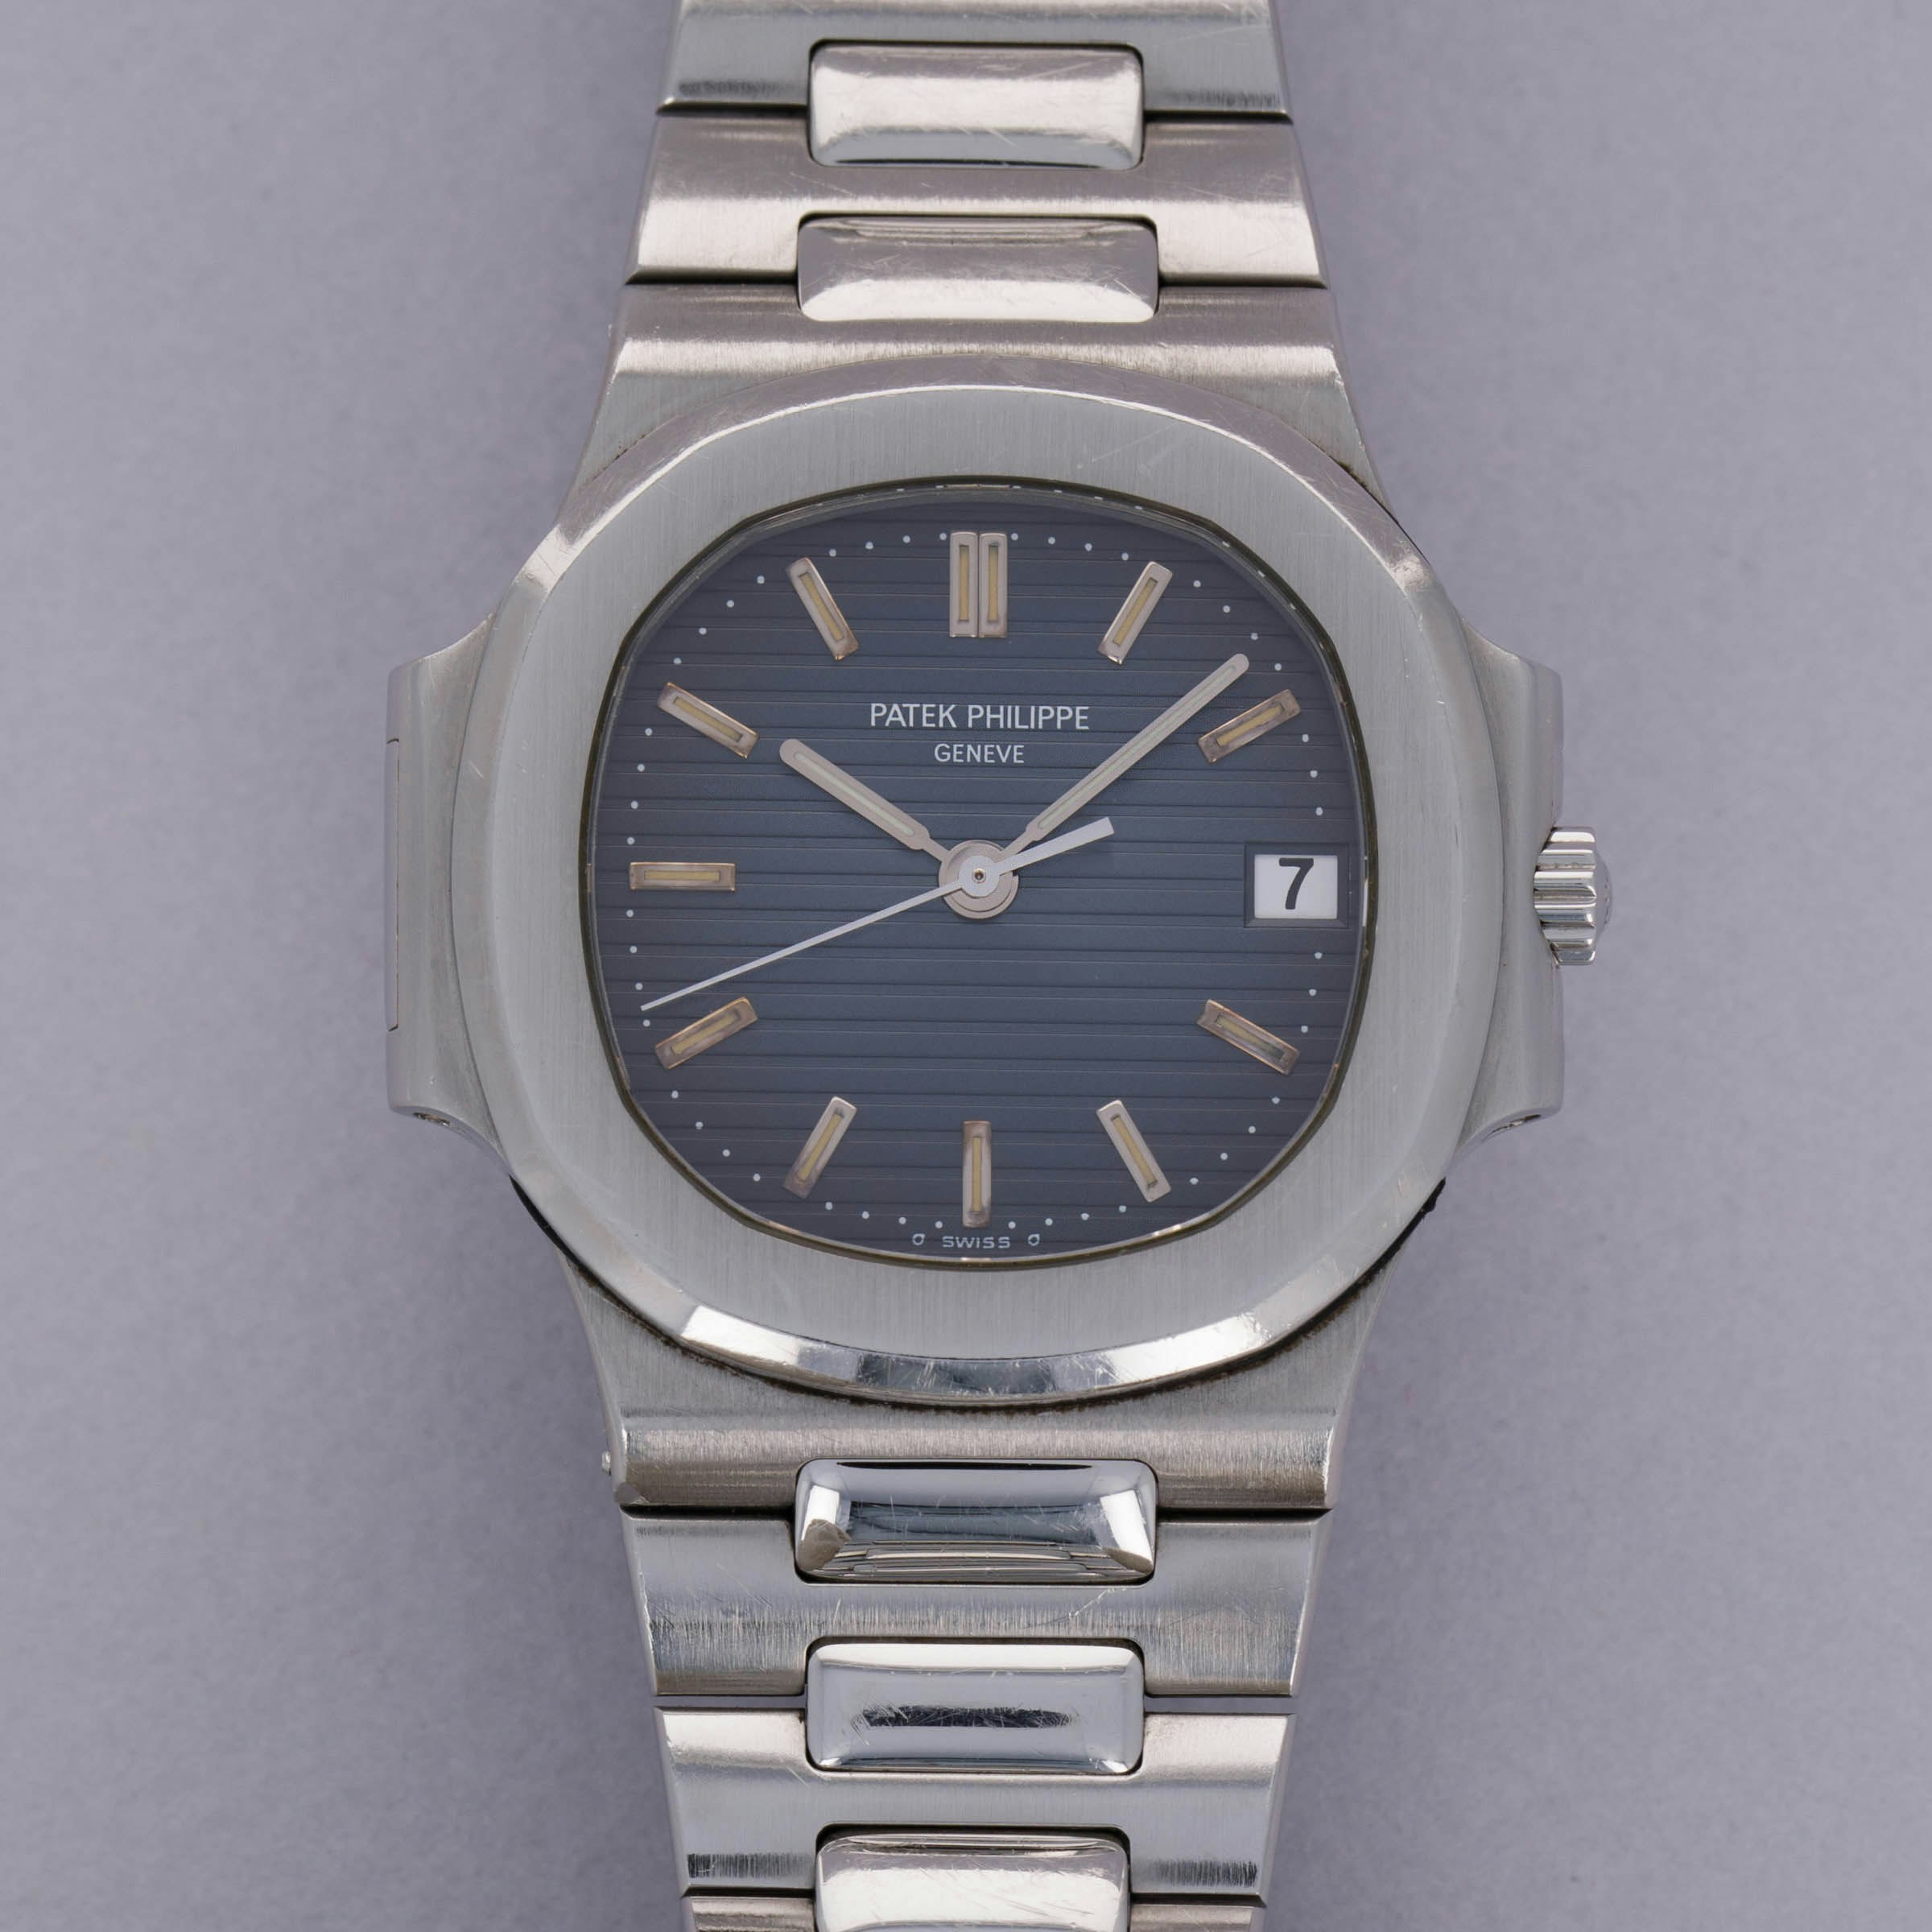 Thumbnail for Patek Philippe Nautilus 3800/1A Stainless Steel with Extract of the Archives